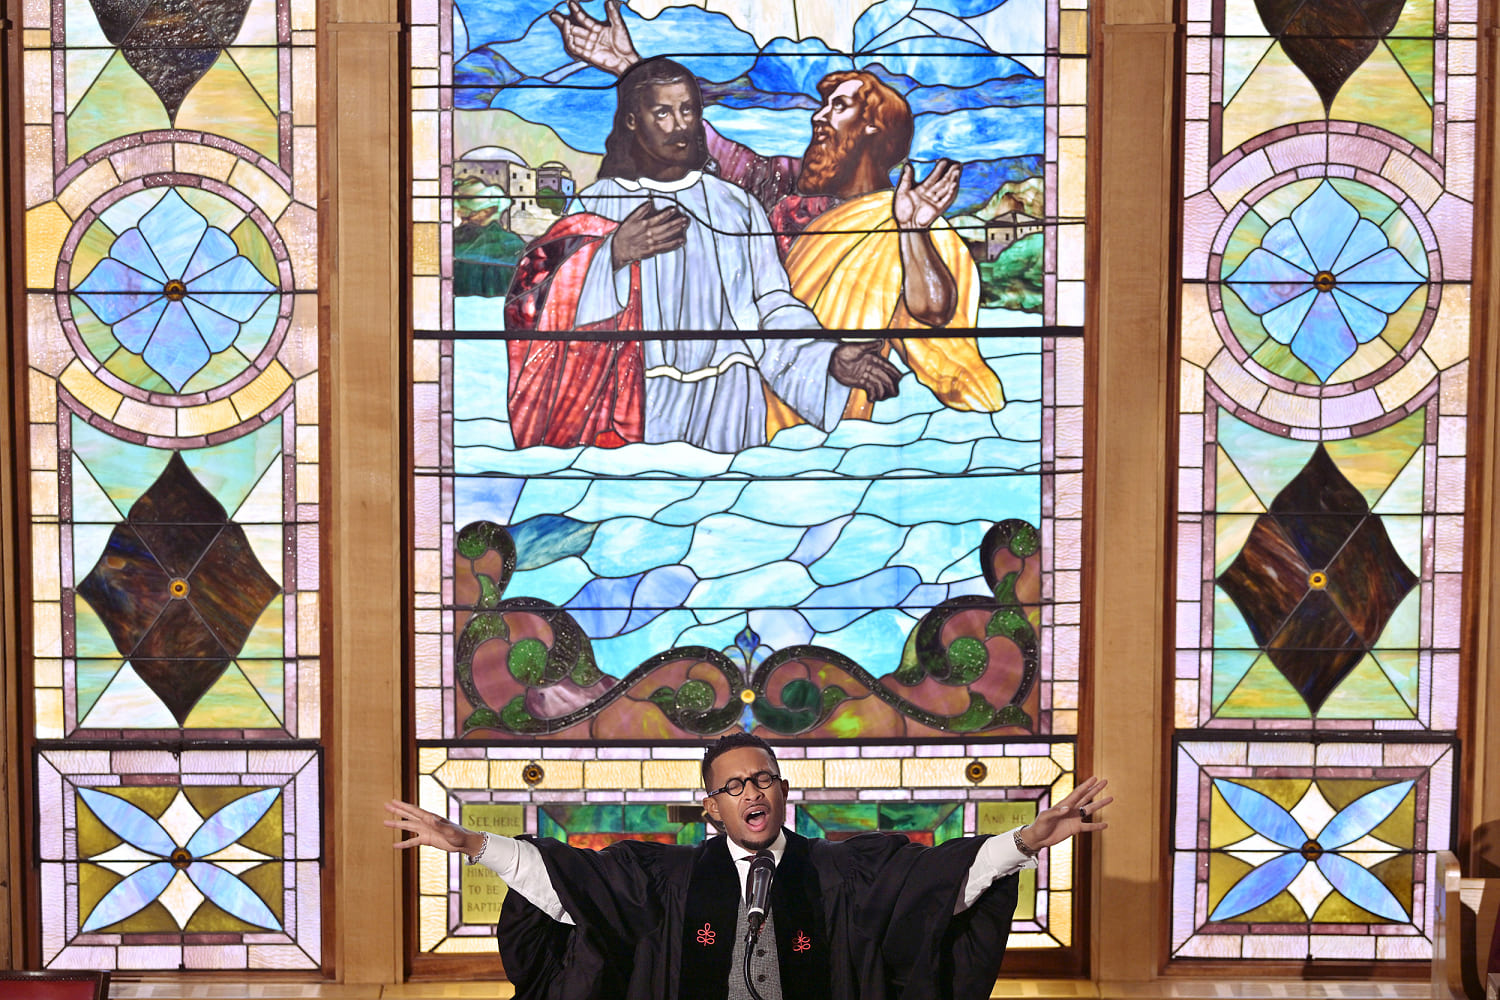 He feared coming out. Now this pastor wants to help Black churches become as welcoming as his own.